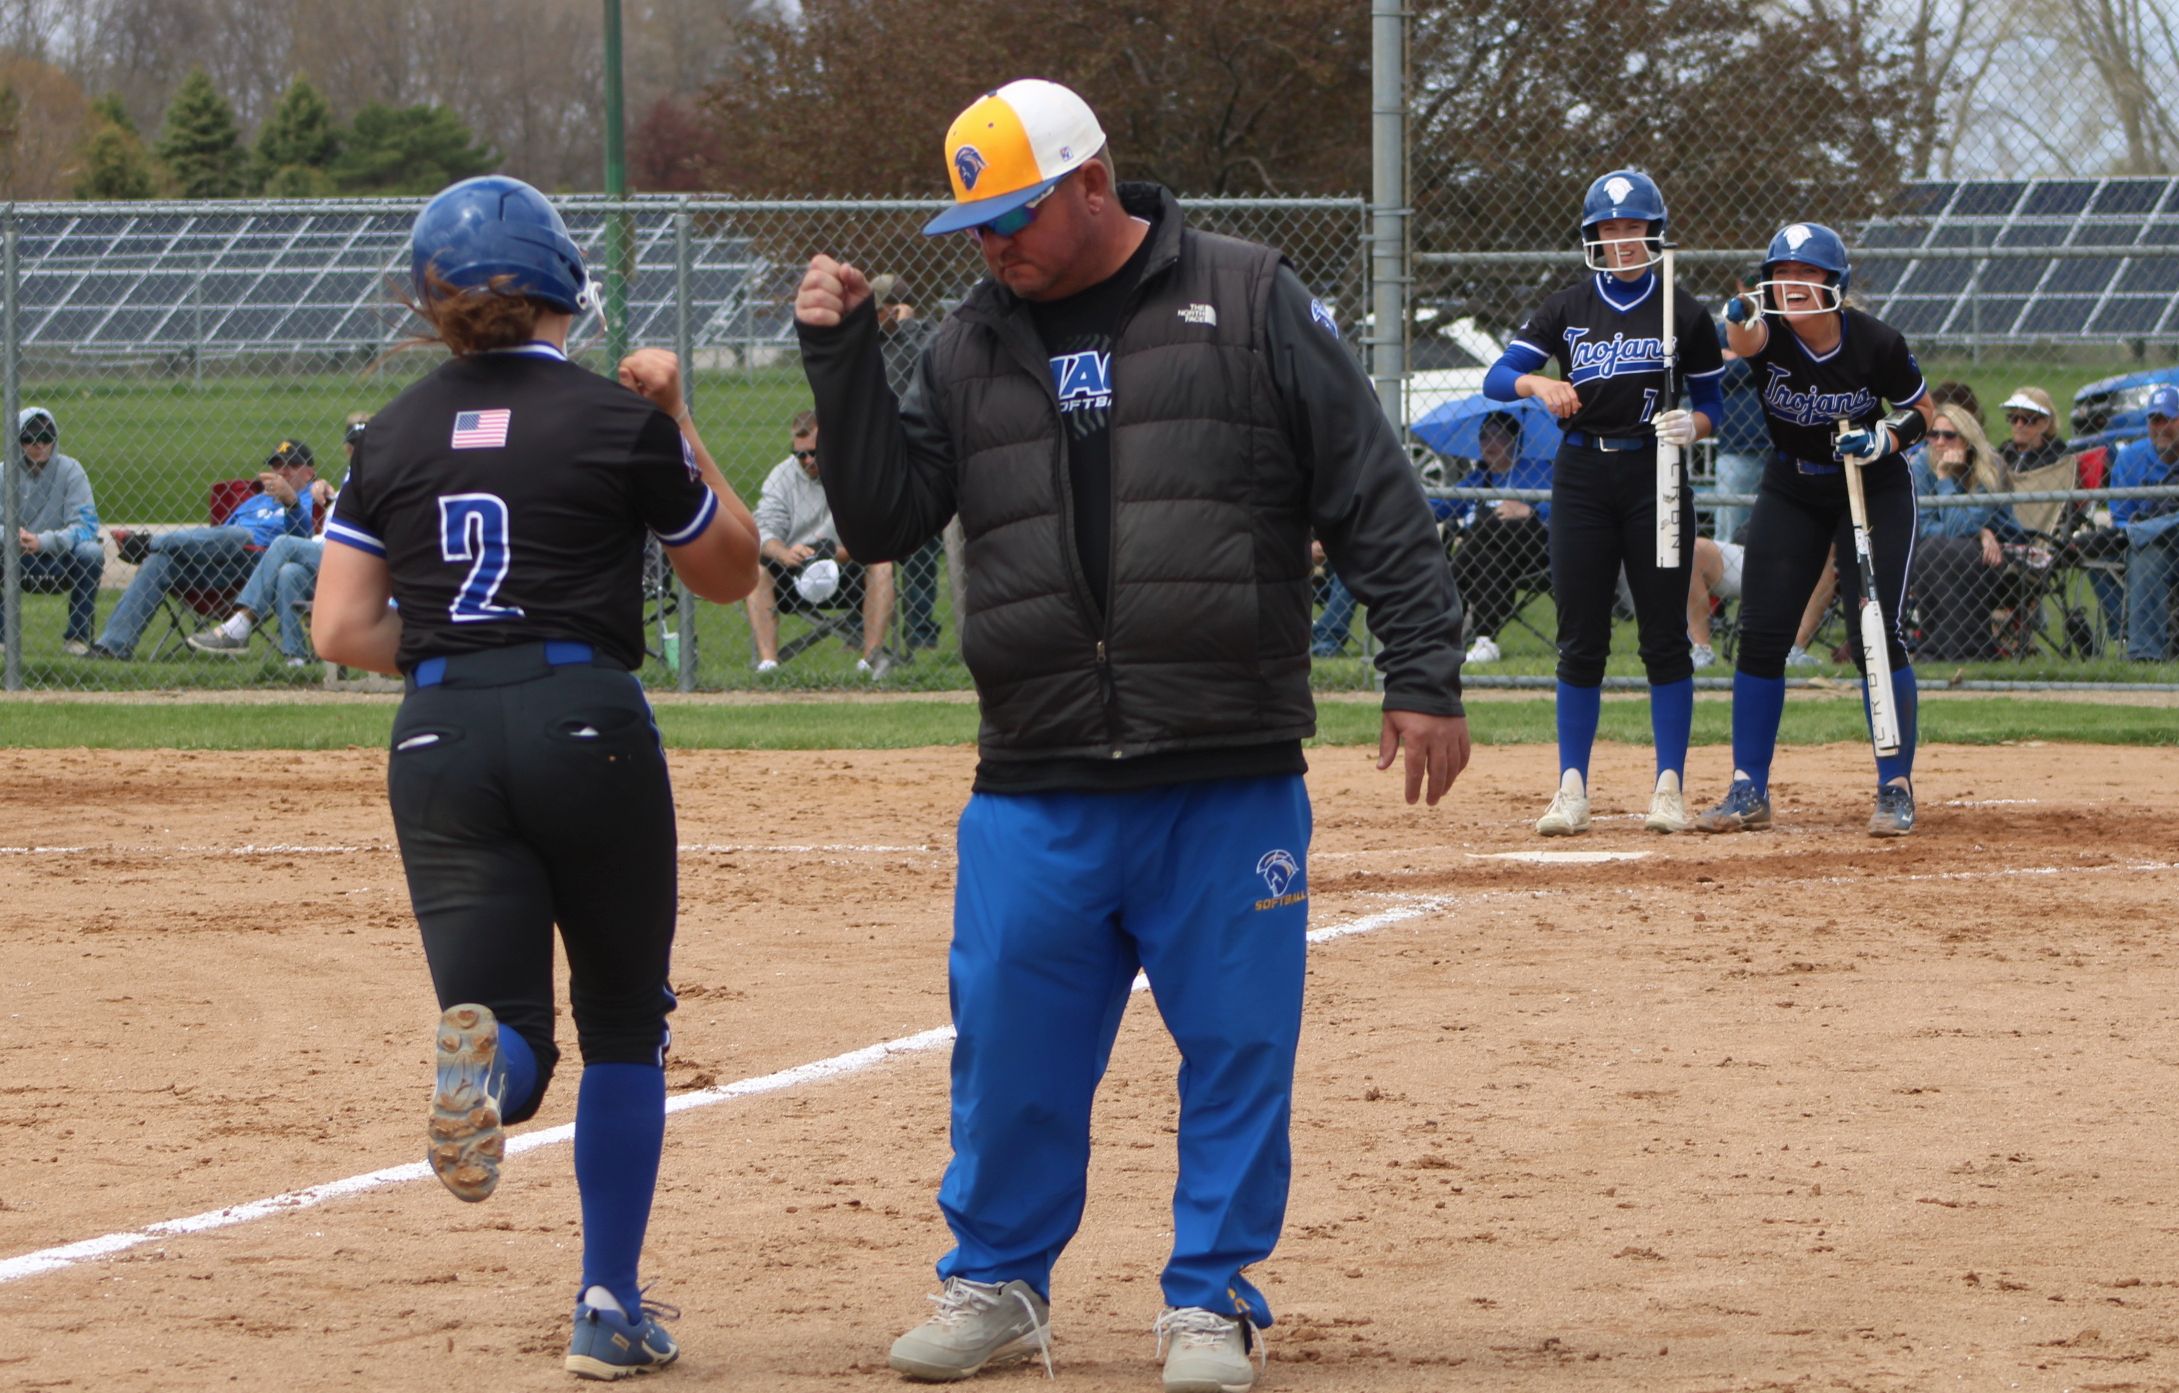 NIACC's Katy Olive rounds third base after hitting a home run in first game of Saturday's doubleheader against Kirkwood.